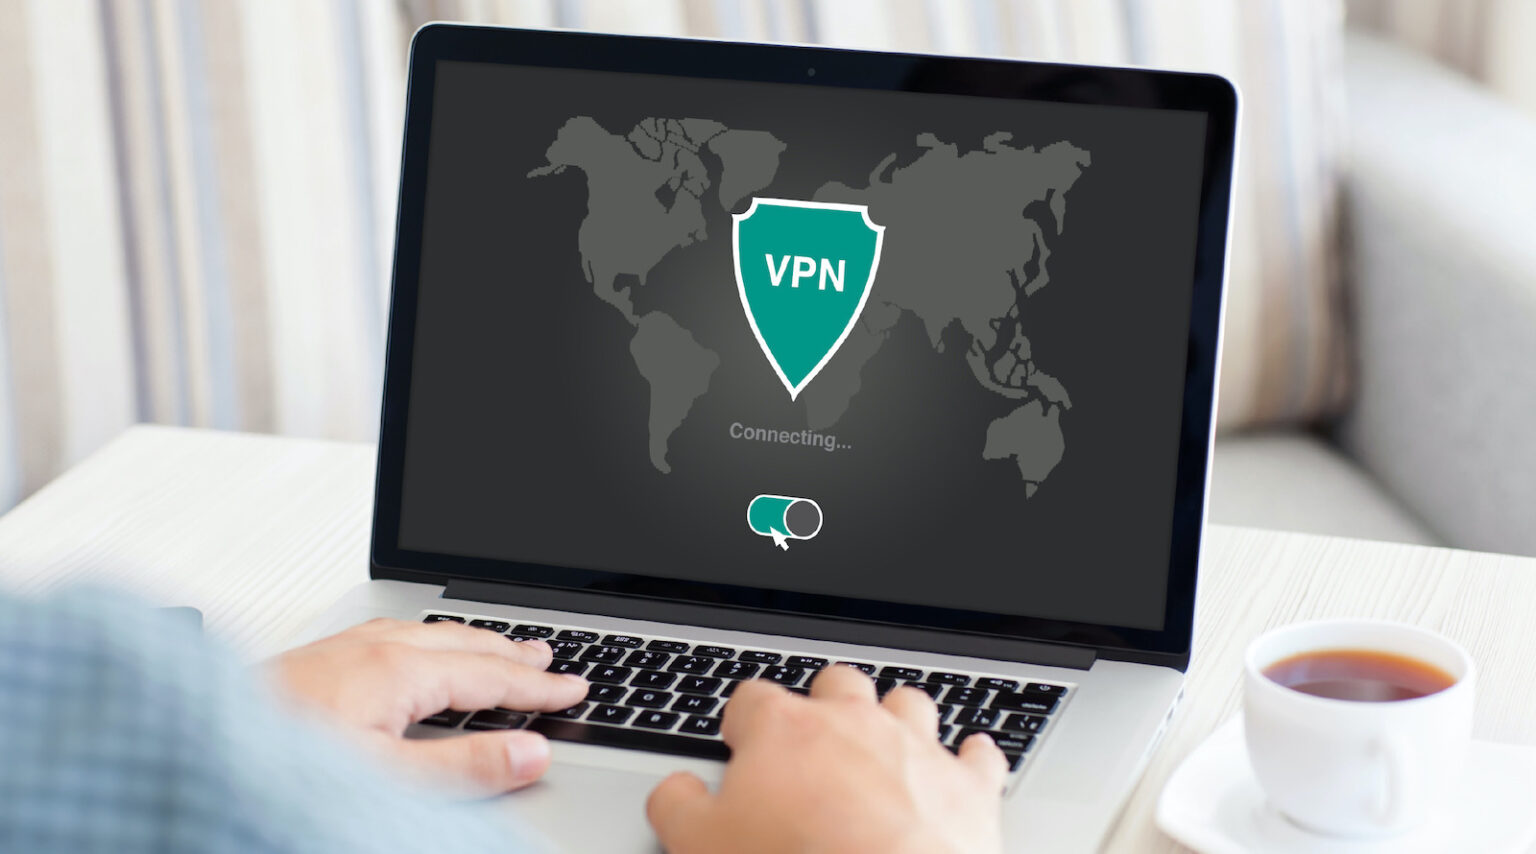 In some countries, VPNs aren't legal due to its use by hackers and criminals. Discover the benefits of using a VPN and why it's banned in multiple regions.